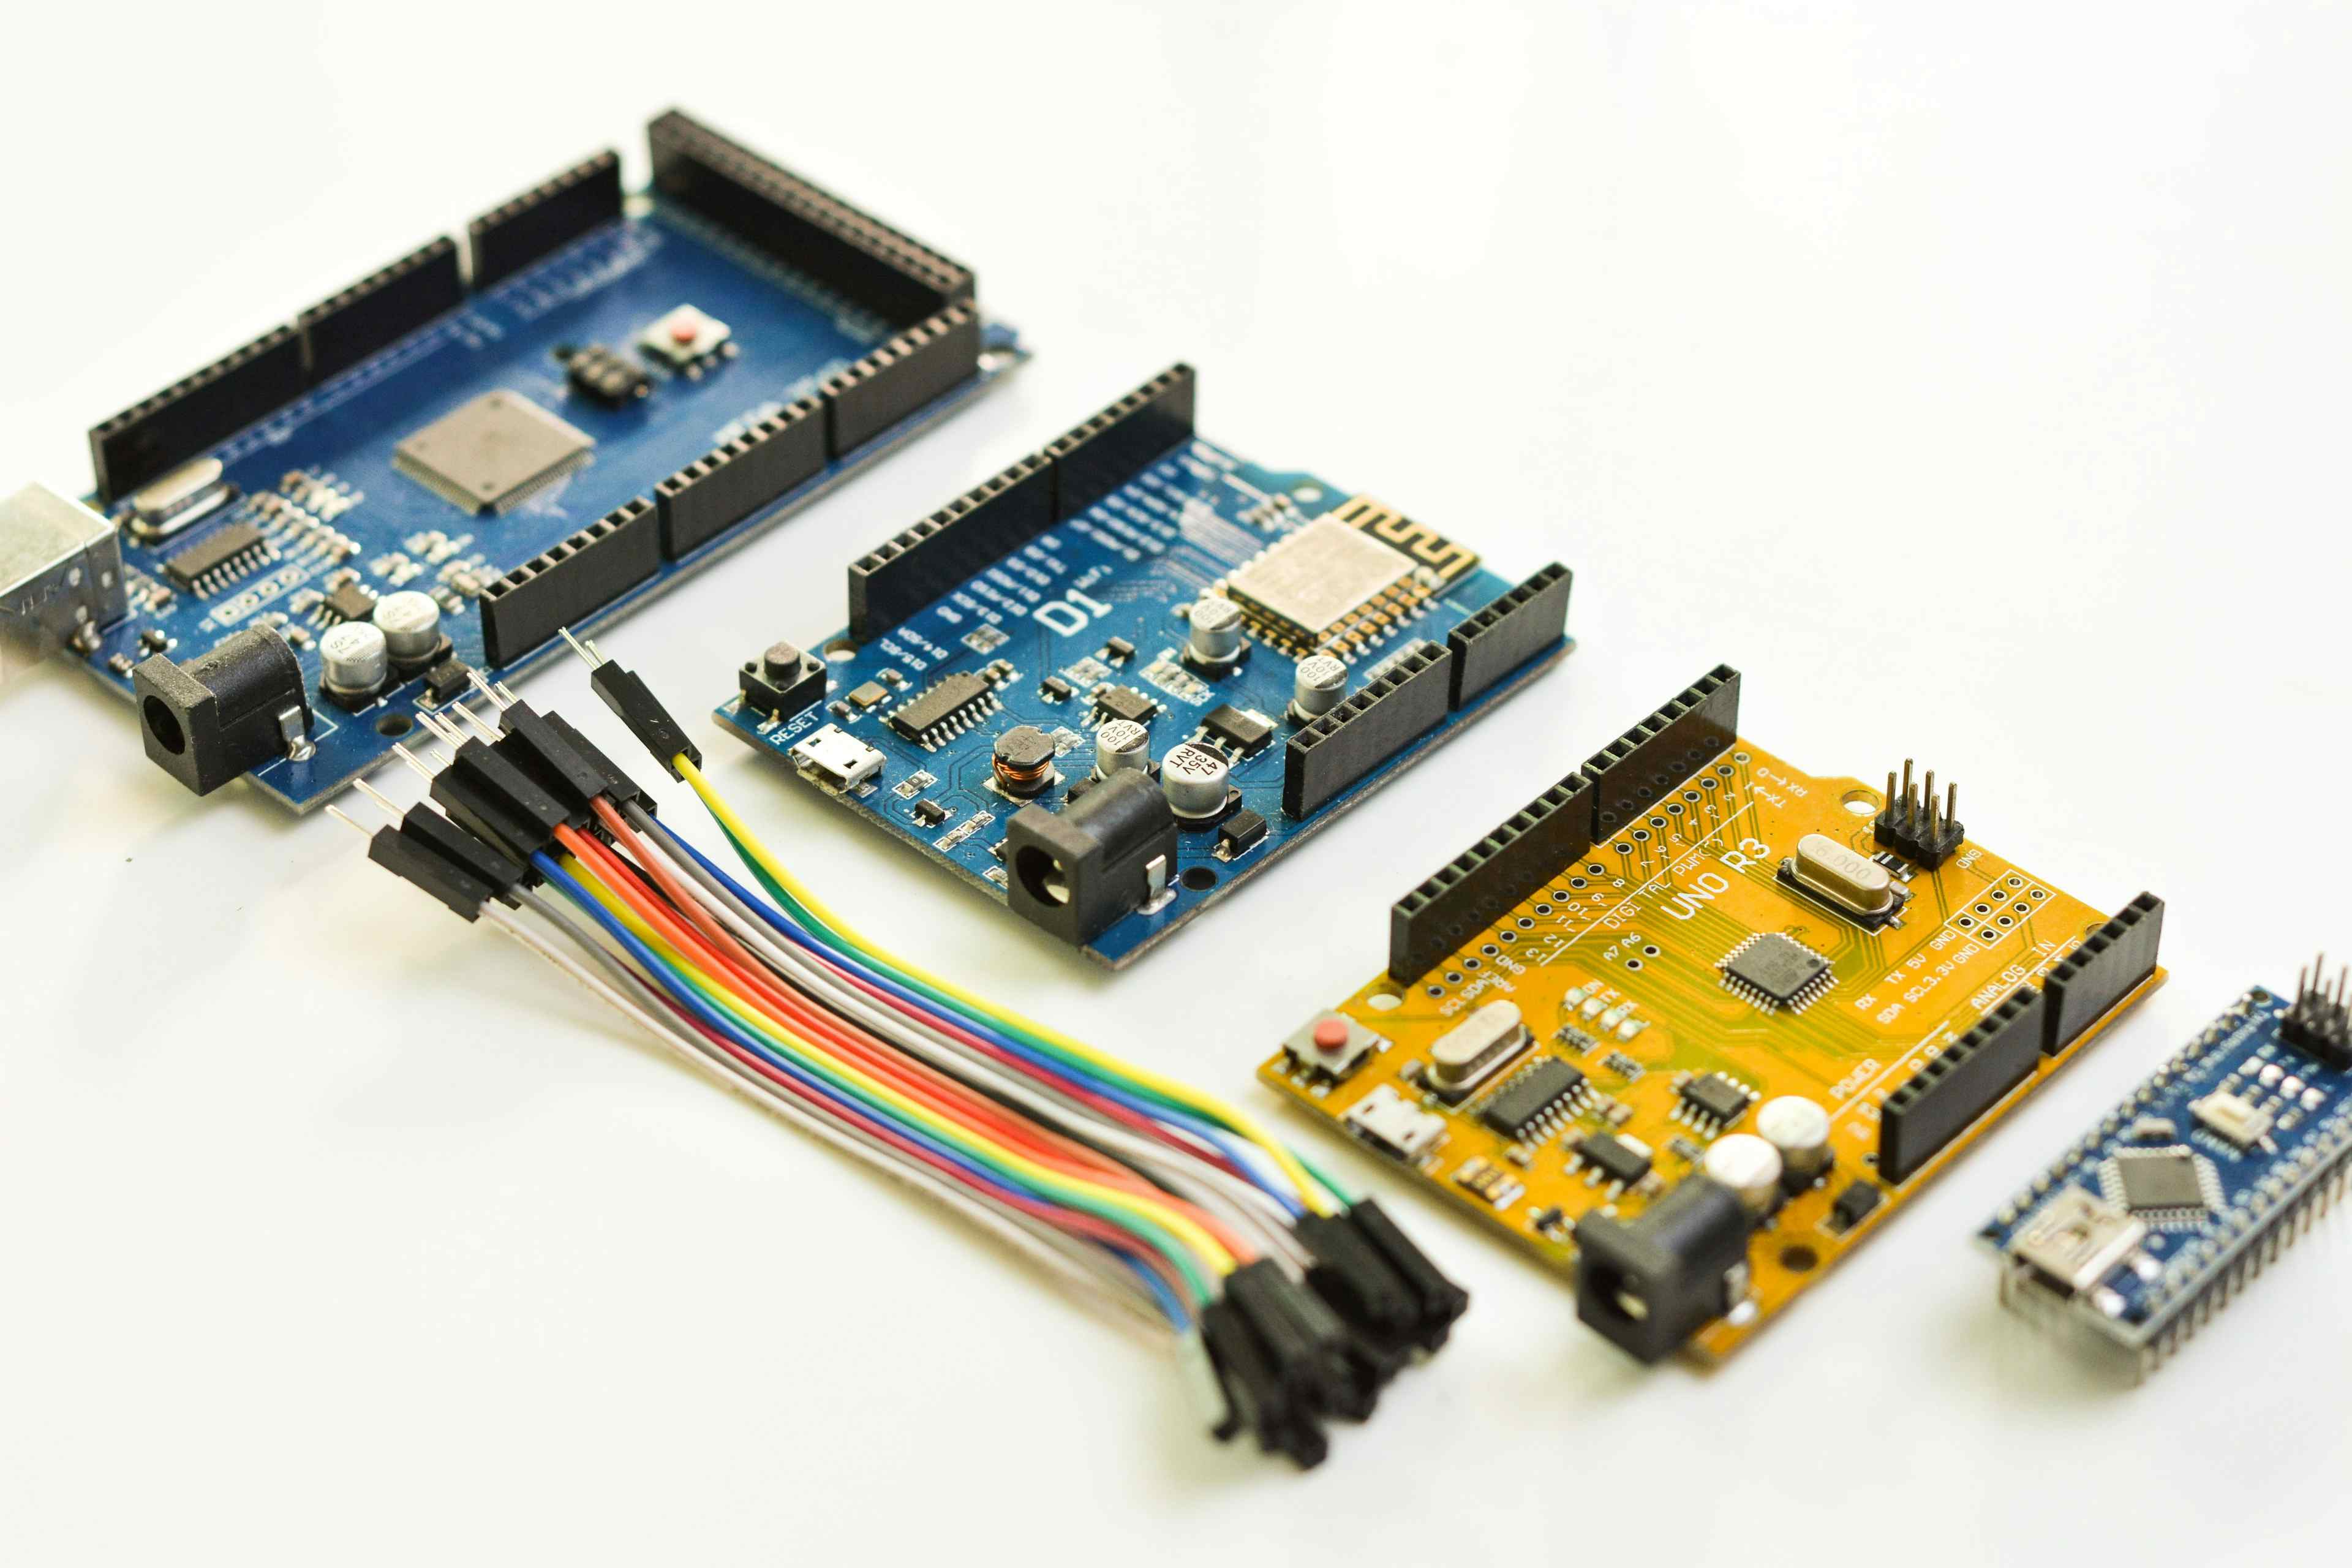 Recommended boards for IoT development and prototyping